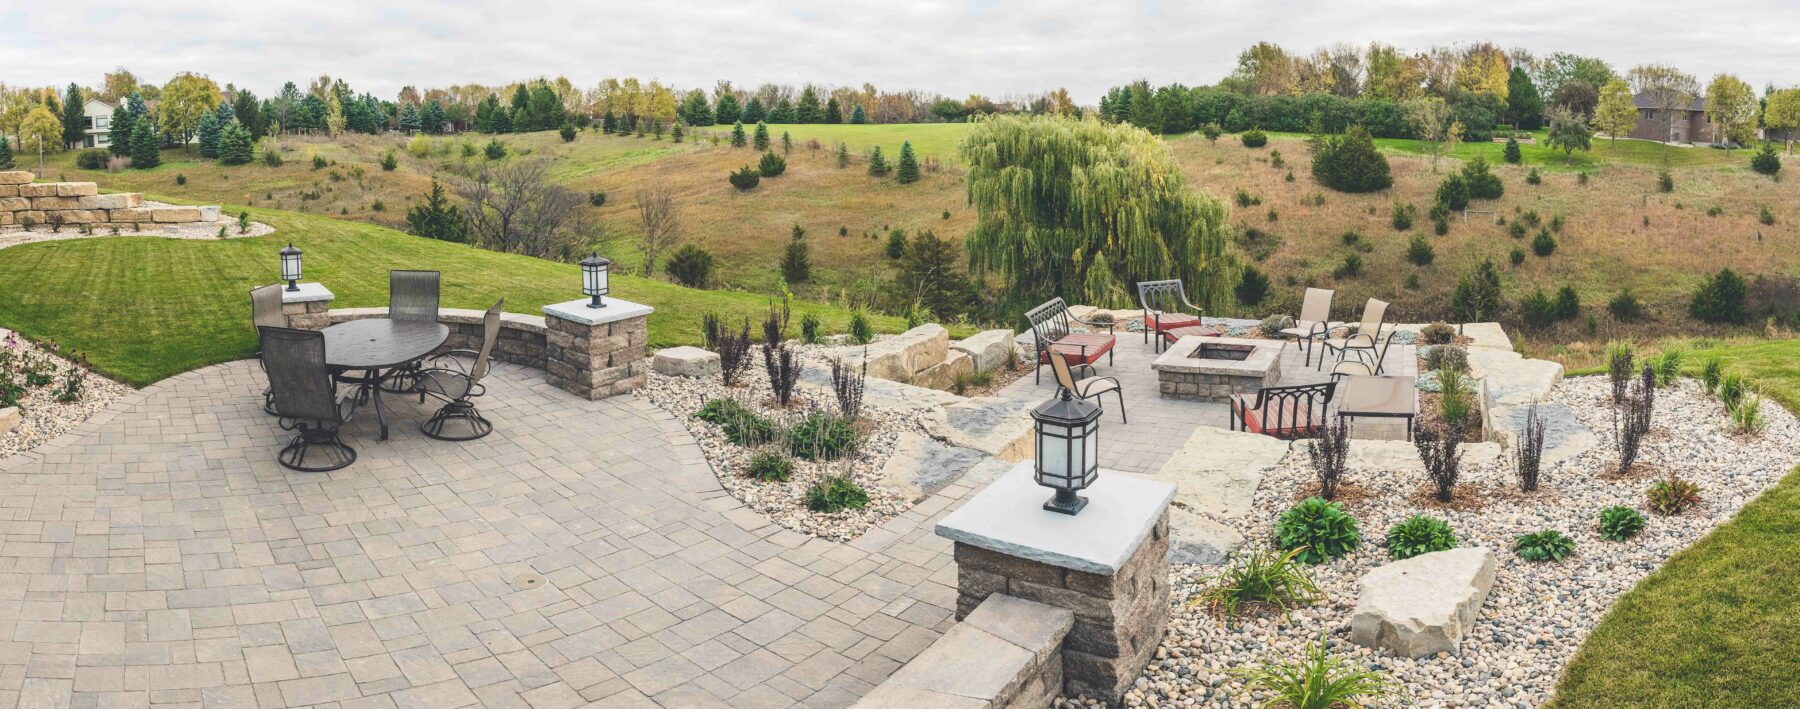 custom hillside patio and fire pit